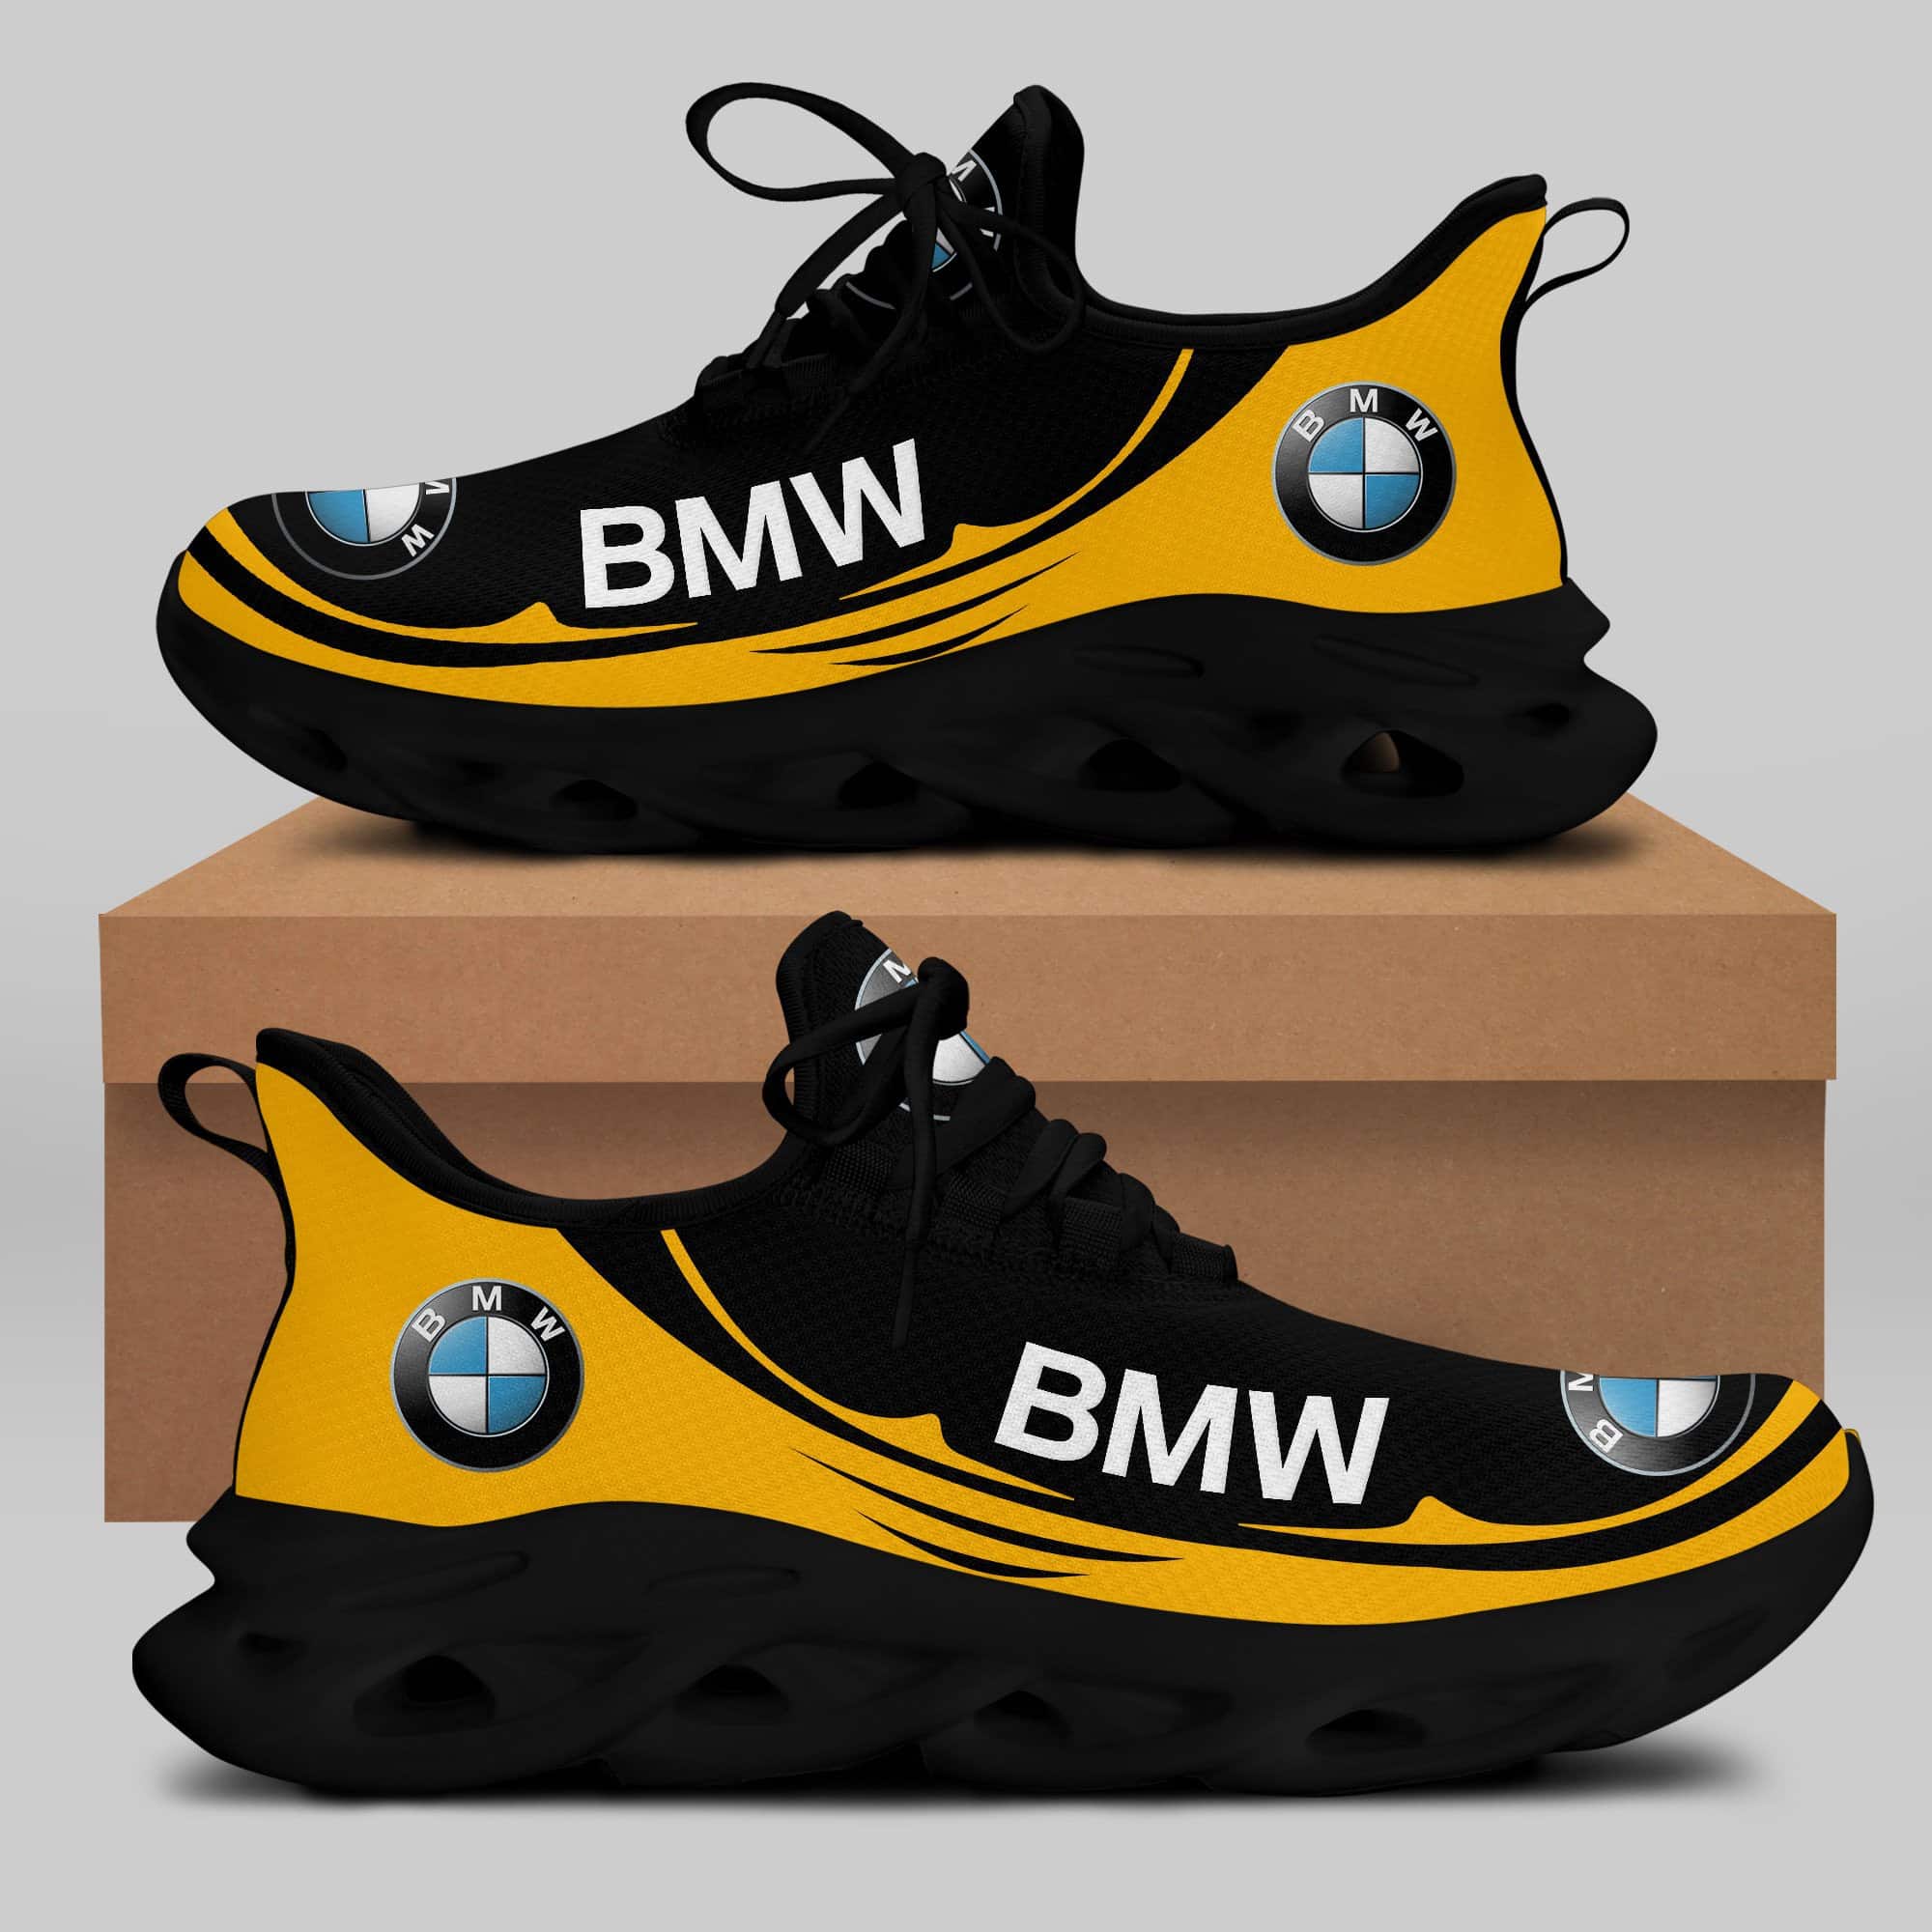 Bmw Running Shoes Max Soul Shoes Sneakers Ver 27 1